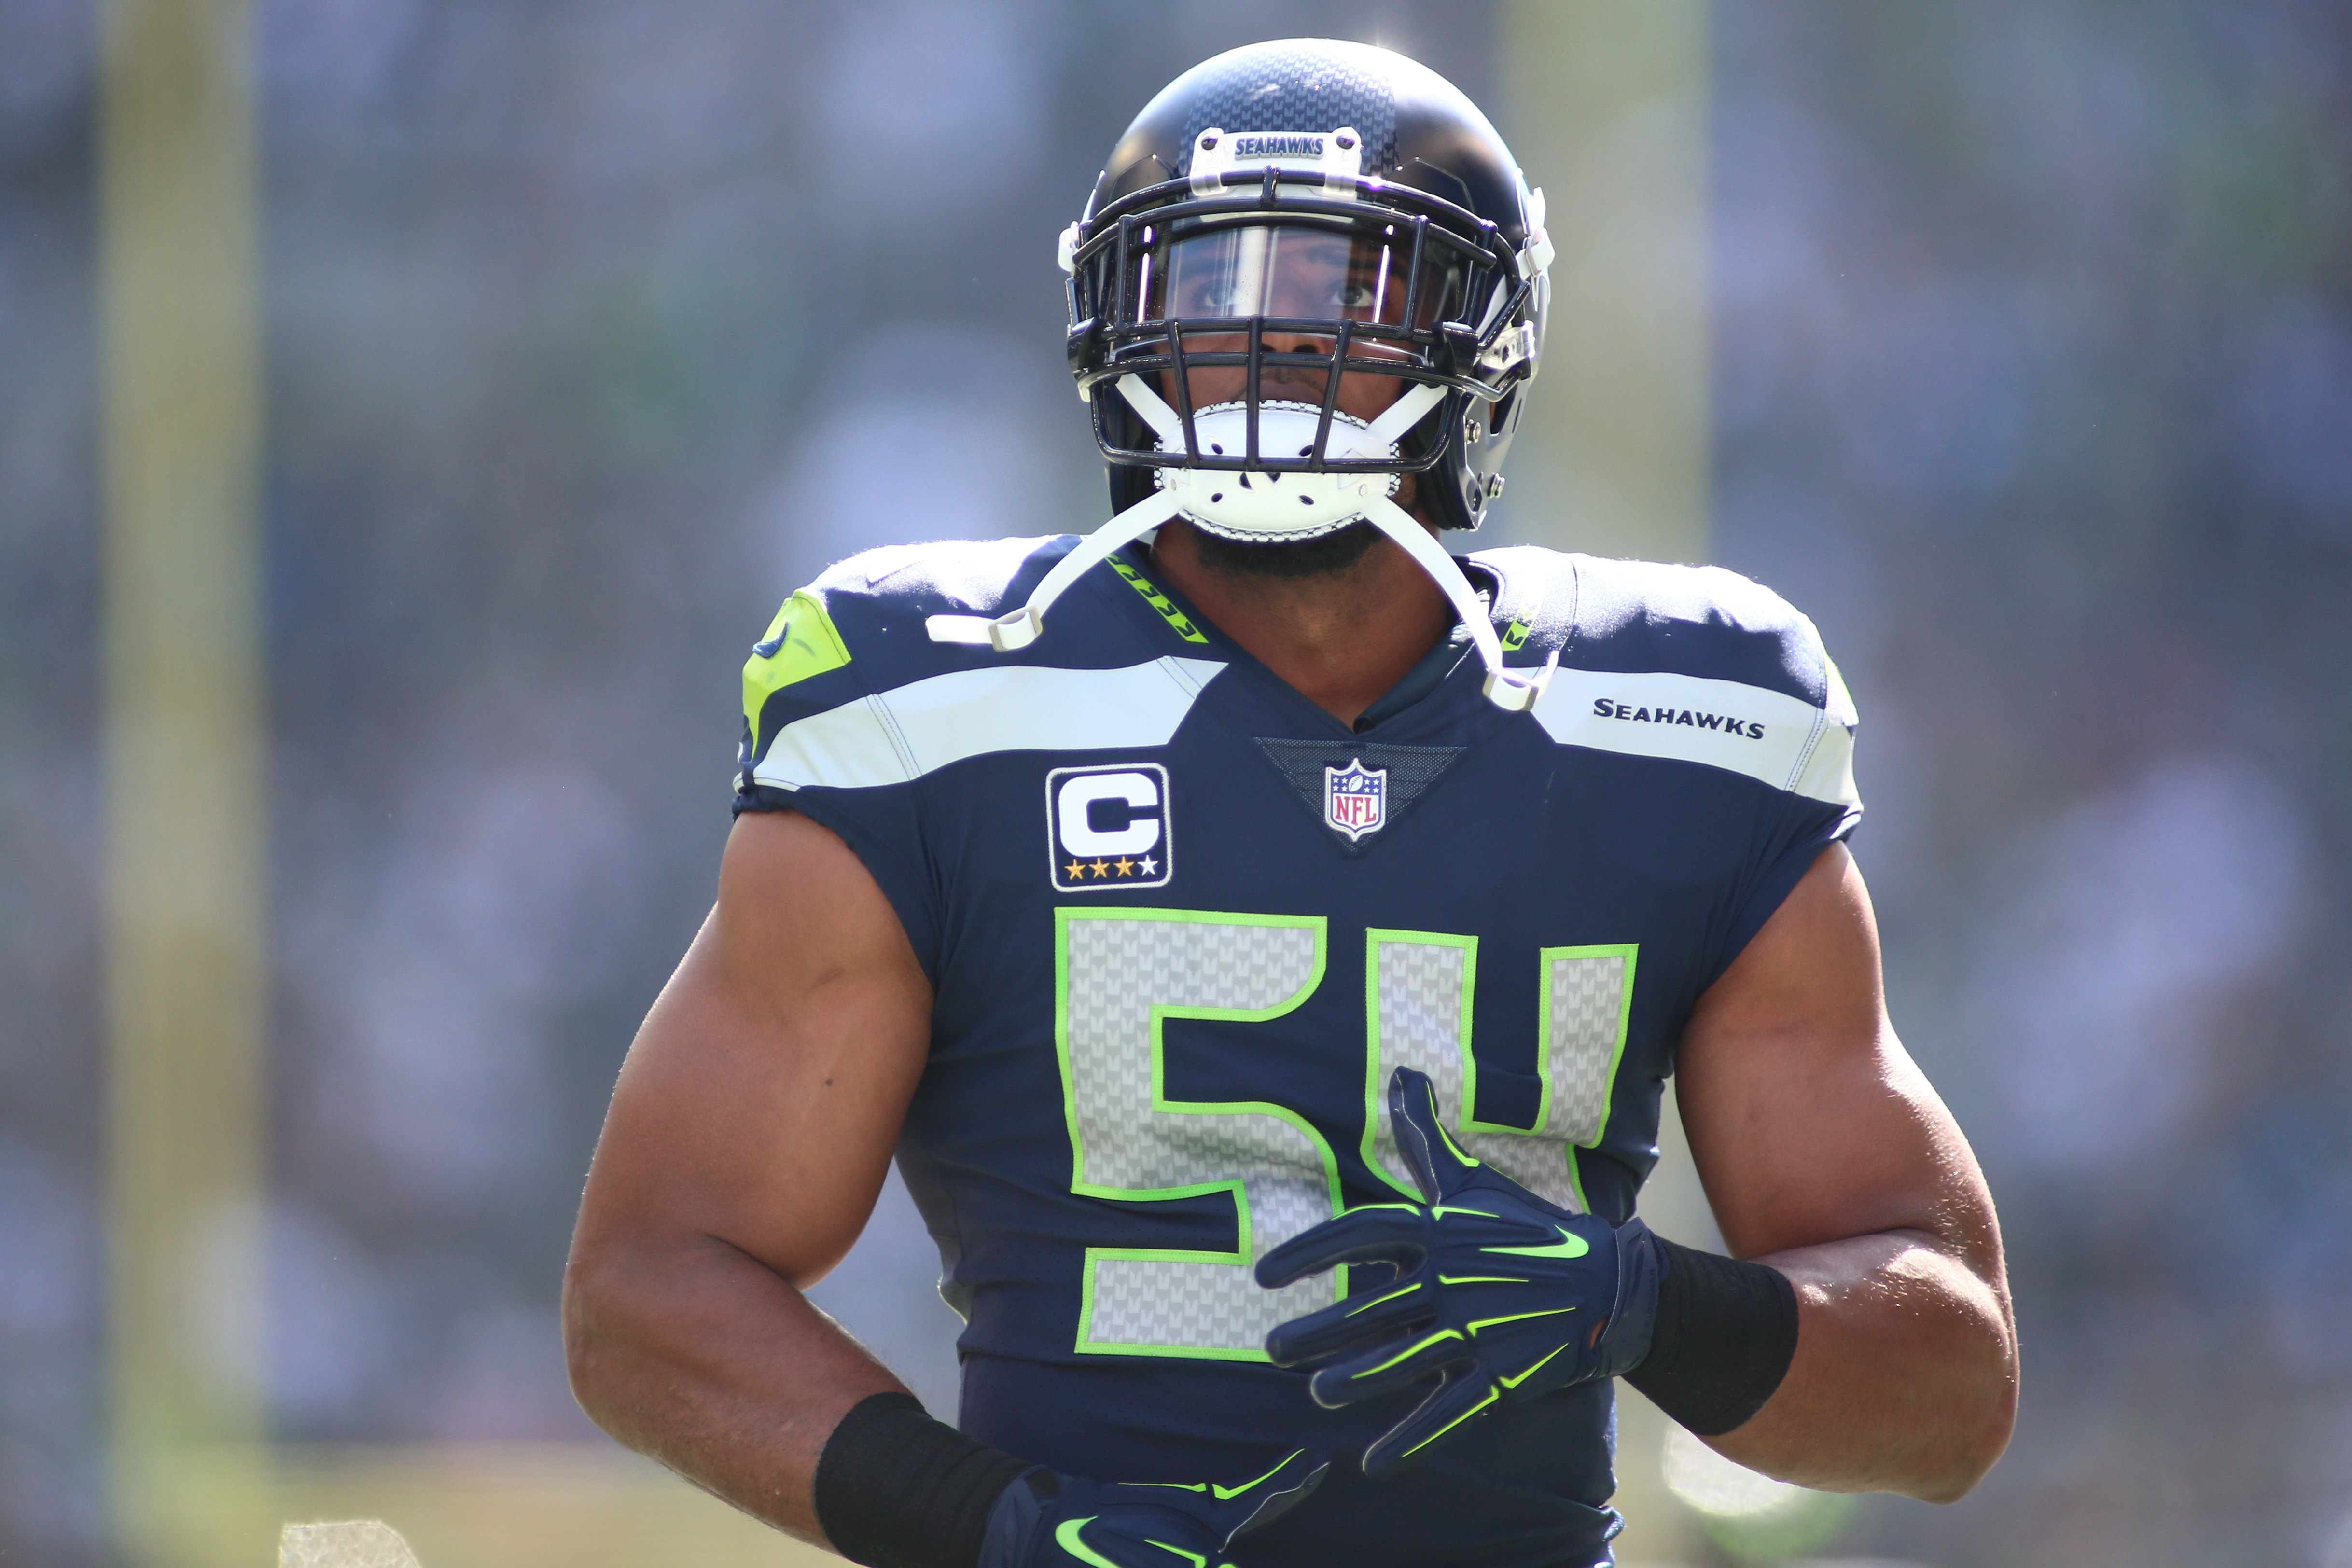 Seahawks Sign LB Bobby Wagner to a 3Year, 54 Million